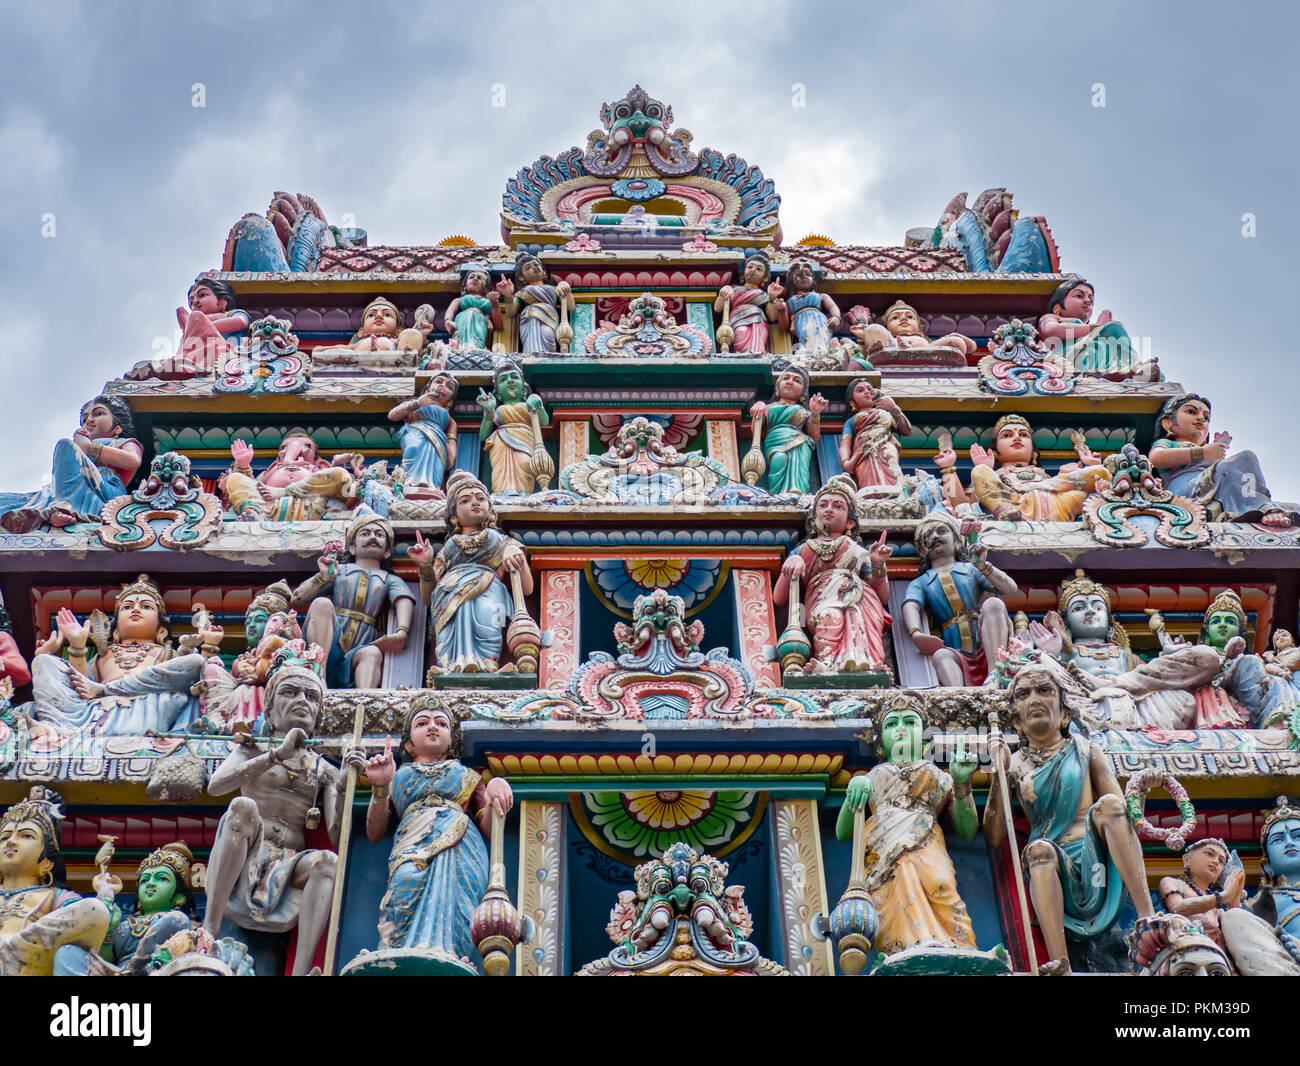 Sculpture, architecture and symbols of Hindu temple at Singapore , Sri Mariamman Temple, Singapore is a oldest Hindu temple. Stock Photo